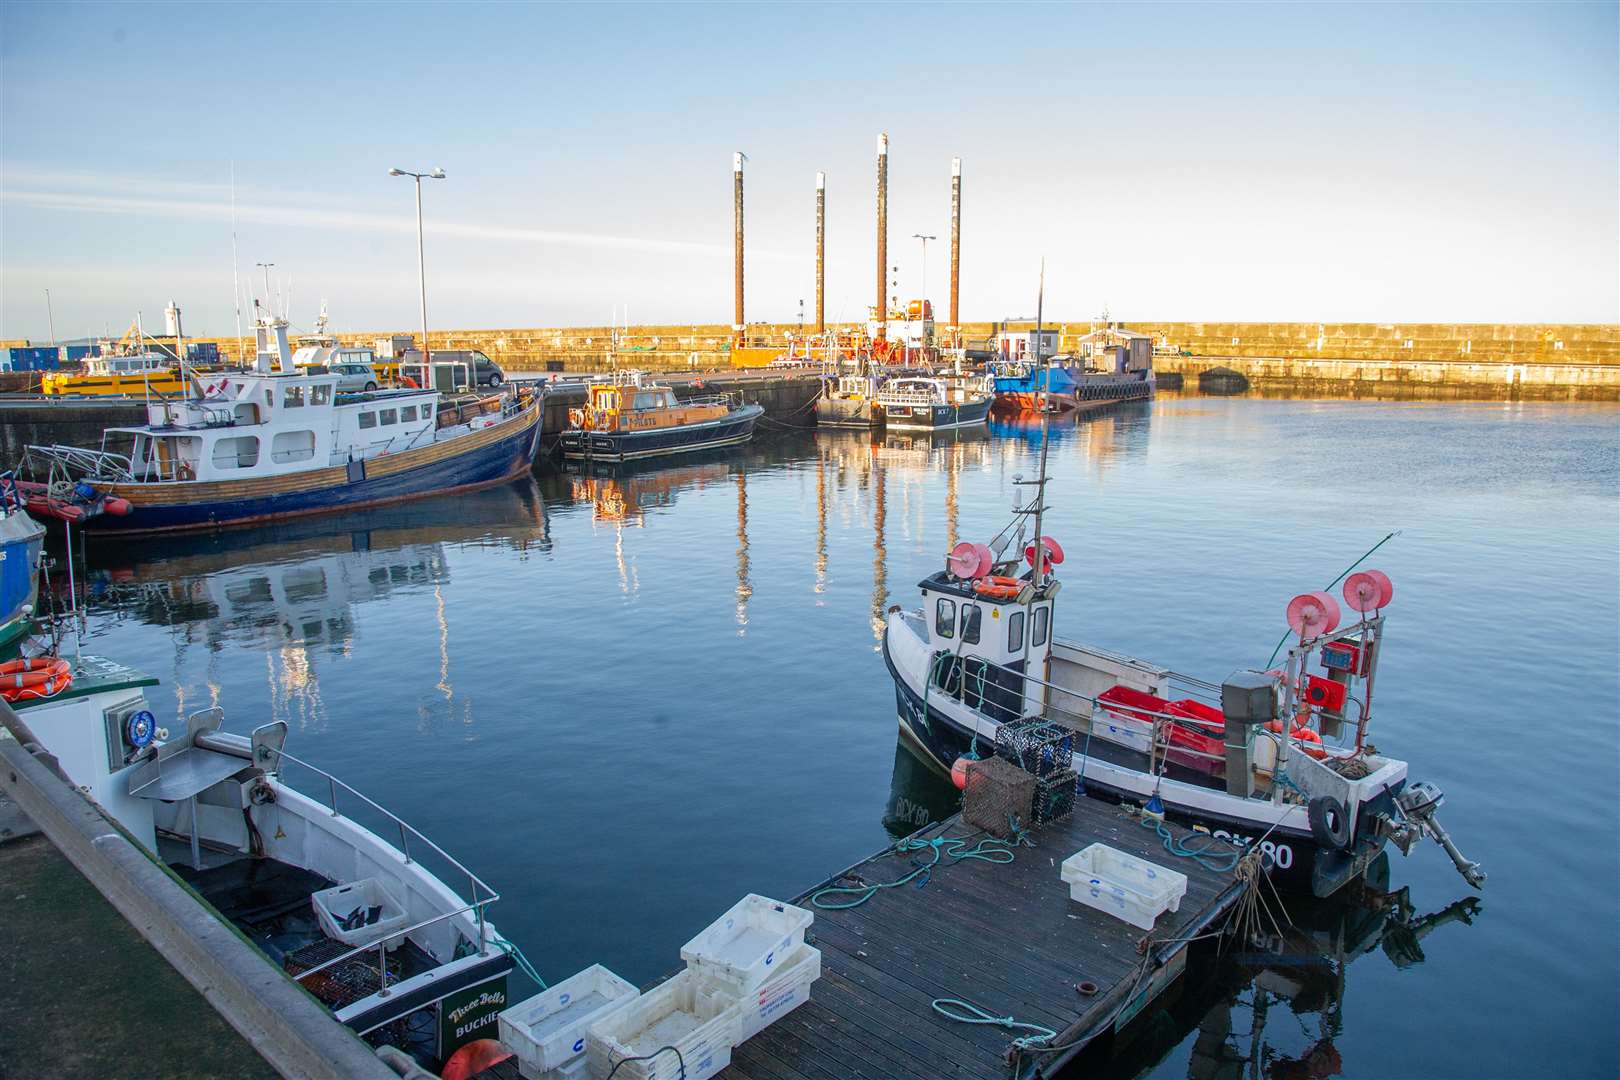 There were no fish landings again at Buckie Harbour last week. Picture: Daniel Forsyth